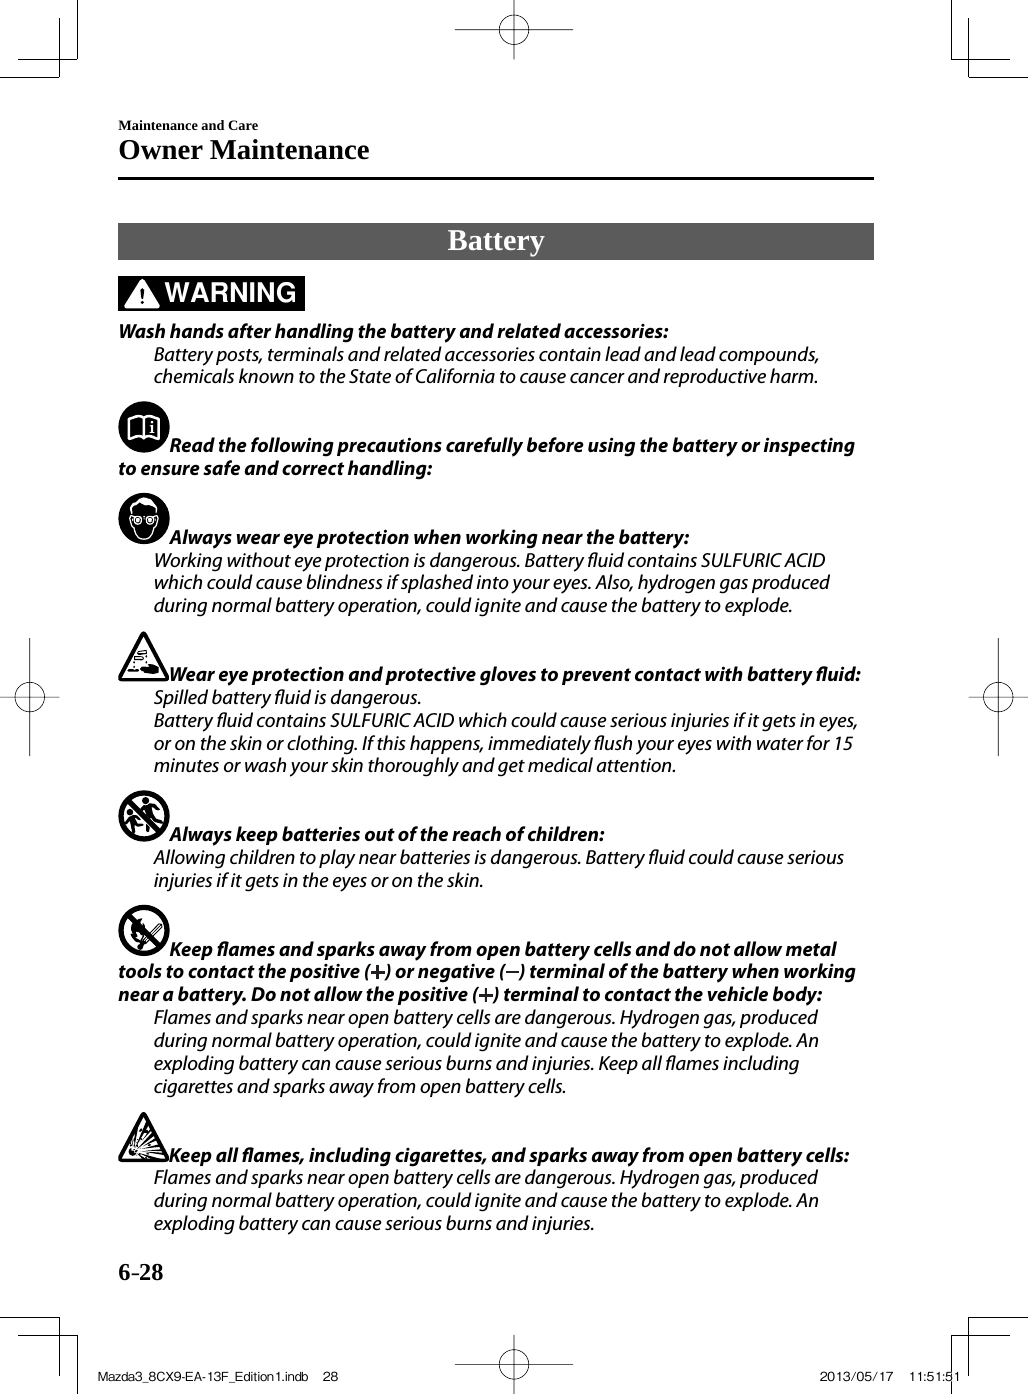 6–28Maintenance and CareOwner Maintenance Battery             WARNING    Wash hands after handling the battery and related accessories:  Battery posts, terminals and related accessories contain lead and lead compounds, chemicals known to the State of California to cause cancer and reproductive harm.     Read the following precautions carefully before using the battery or inspecting to ensure safe and correct handling:     Always wear eye protection when working near the battery:  Working without eye protection is dangerous. Battery  uid contains SULFURIC ACID which could cause blindness if splashed into your eyes. Also, hydrogen gas produced during normal battery operation, could ignite and cause the battery to explode.     Wear eye protection and protective gloves to prevent contact with battery  uid:  Spilled battery  uid is dangerous.  Battery  uid contains SULFURIC ACID which could cause serious injuries if it gets in eyes, or on the skin or clothing. If this happens, immediately  ush your eyes with water for 15 minutes or wash your skin thoroughly and get medical attention.     Always keep batteries out of the reach of children:  Allowing children to play near batteries is dangerous. Battery  uid could cause serious injuries if it gets in the eyes or on the skin.     Keep  ames and sparks away from open battery cells and do not allow metal tools to contact the positive ( ) or negative ( ) terminal of the battery when working near a battery. Do not allow the positive ( ) terminal to contact the vehicle body:  Flames and sparks near open battery cells are dangerous. Hydrogen gas, produced during normal battery operation, could ignite and cause the battery to explode. An exploding battery can cause serious burns and injuries. Keep all  ames including cigarettes and sparks away from open battery cells.     Keep all  ames, including cigarettes, and sparks away from open battery cells:  Flames and sparks near open battery cells are dangerous. Hydrogen gas, produced during normal battery operation, could ignite and cause the battery to explode. An exploding battery can cause serious burns and injuries.   Mazda3_8CX9-EA-13F_Edition1.indb   28Mazda3_8CX9-EA-13F_Edition1.indb   28 2013/05/17   11:51:512013/05/17   11:51:51